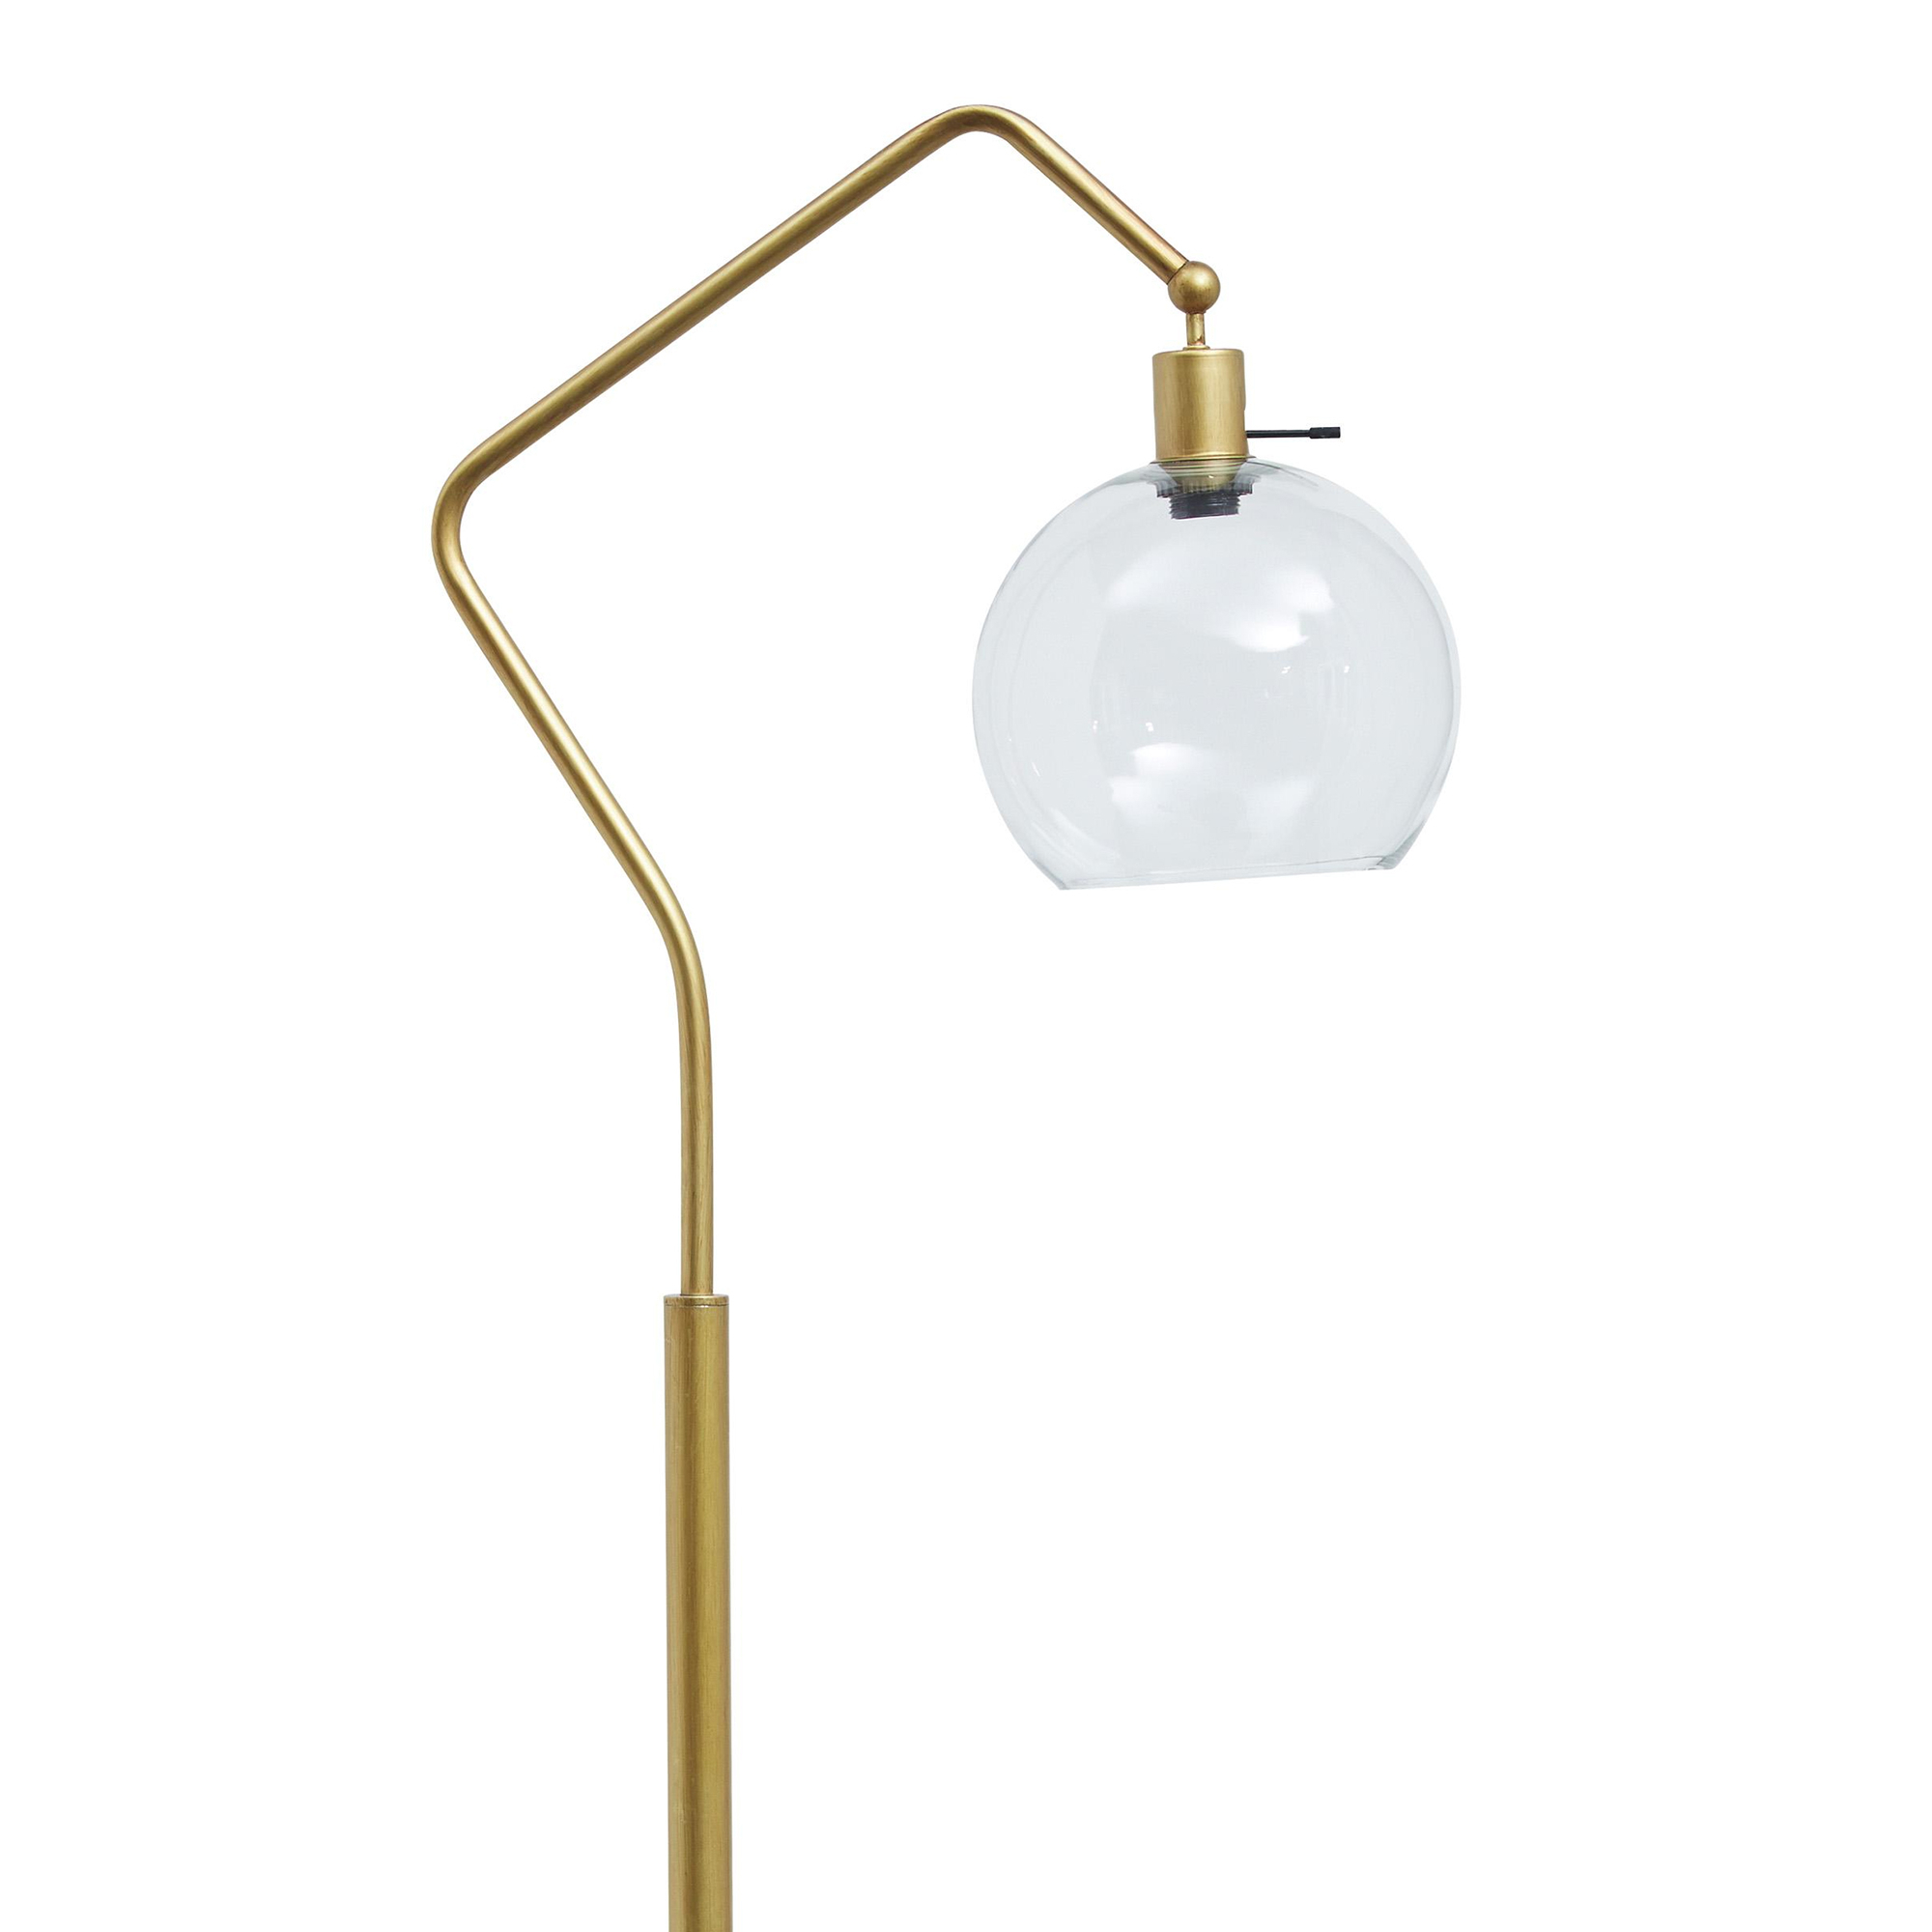 Glass Shade Tilted Metal Frame Floor Lamp, Antique Gold And Clear- Saltoro Sherpi